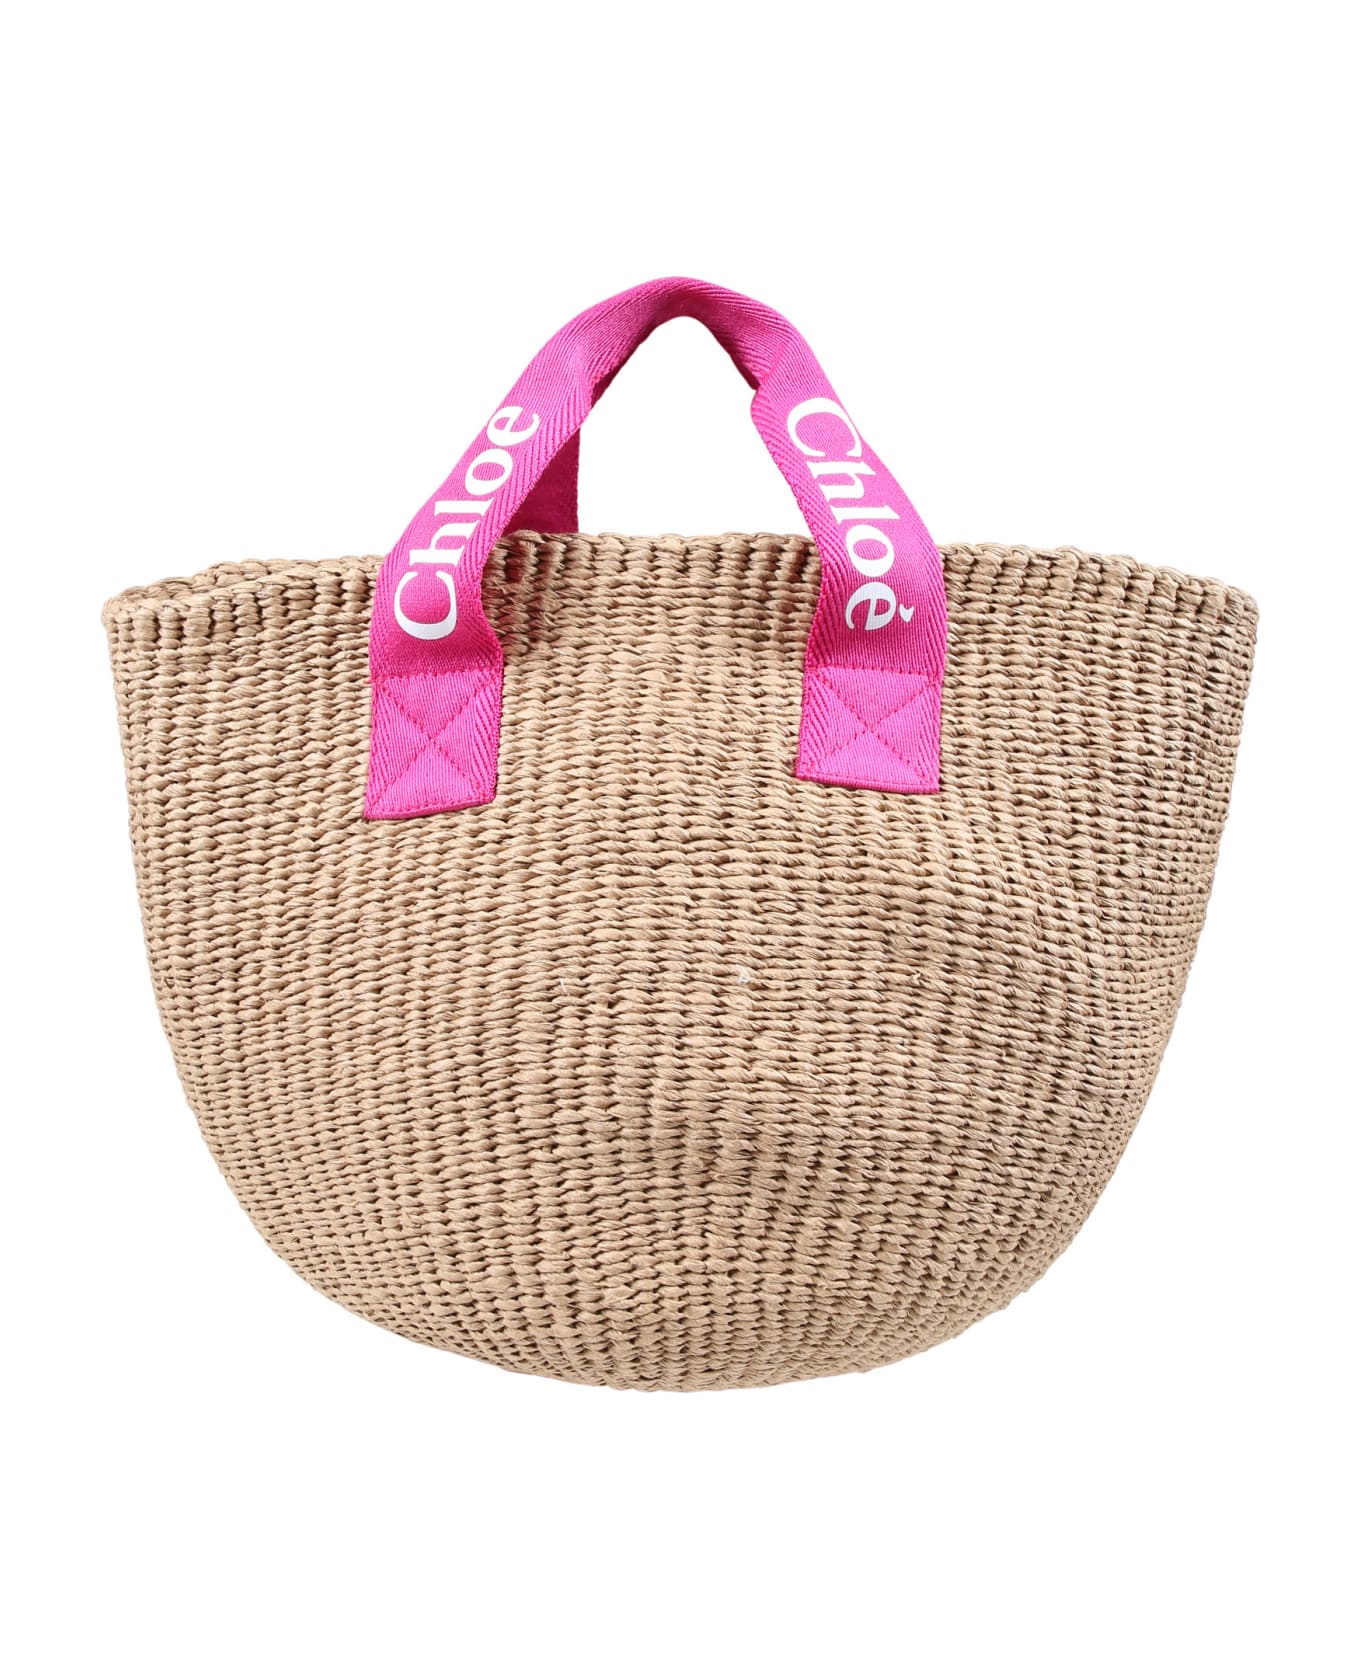 Chloé Casual Beige Straw Bag For Girl - Beige アクセサリー＆ギフト